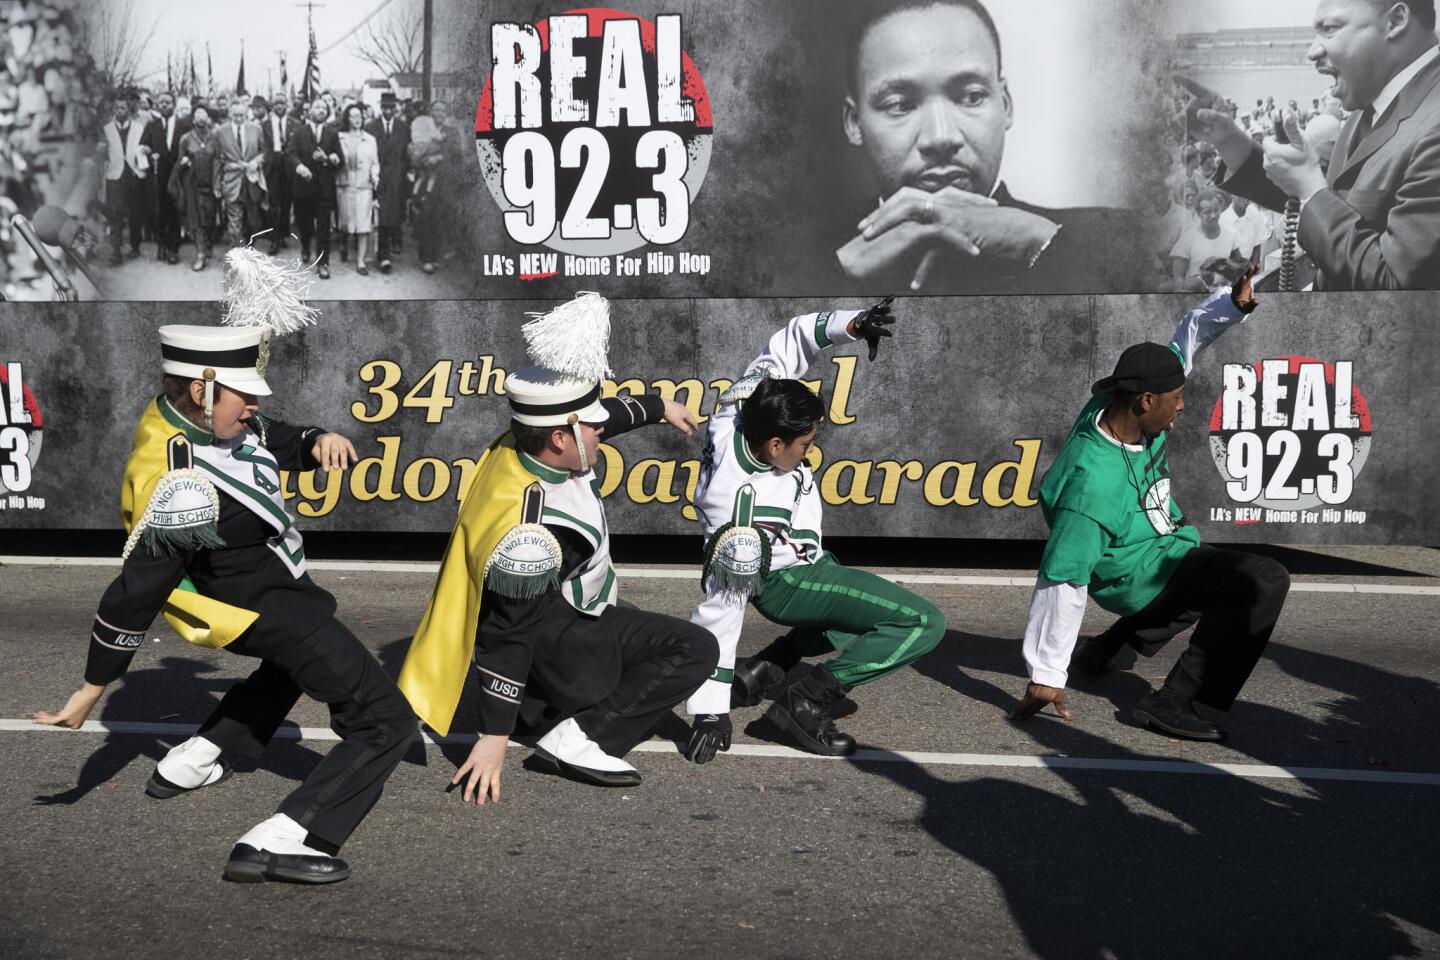 Inglewood High School Marching Band members dance to music before performing in honor of the legacy of Dr. Martin Luther King Jr. at the 34th annual Kingdom Day Parade along Martin Luther King Jr. Boulevard on Monday in Los Angeles. The theme was "Healthy Bodies, Healthy Minds, Healthy Democracy."